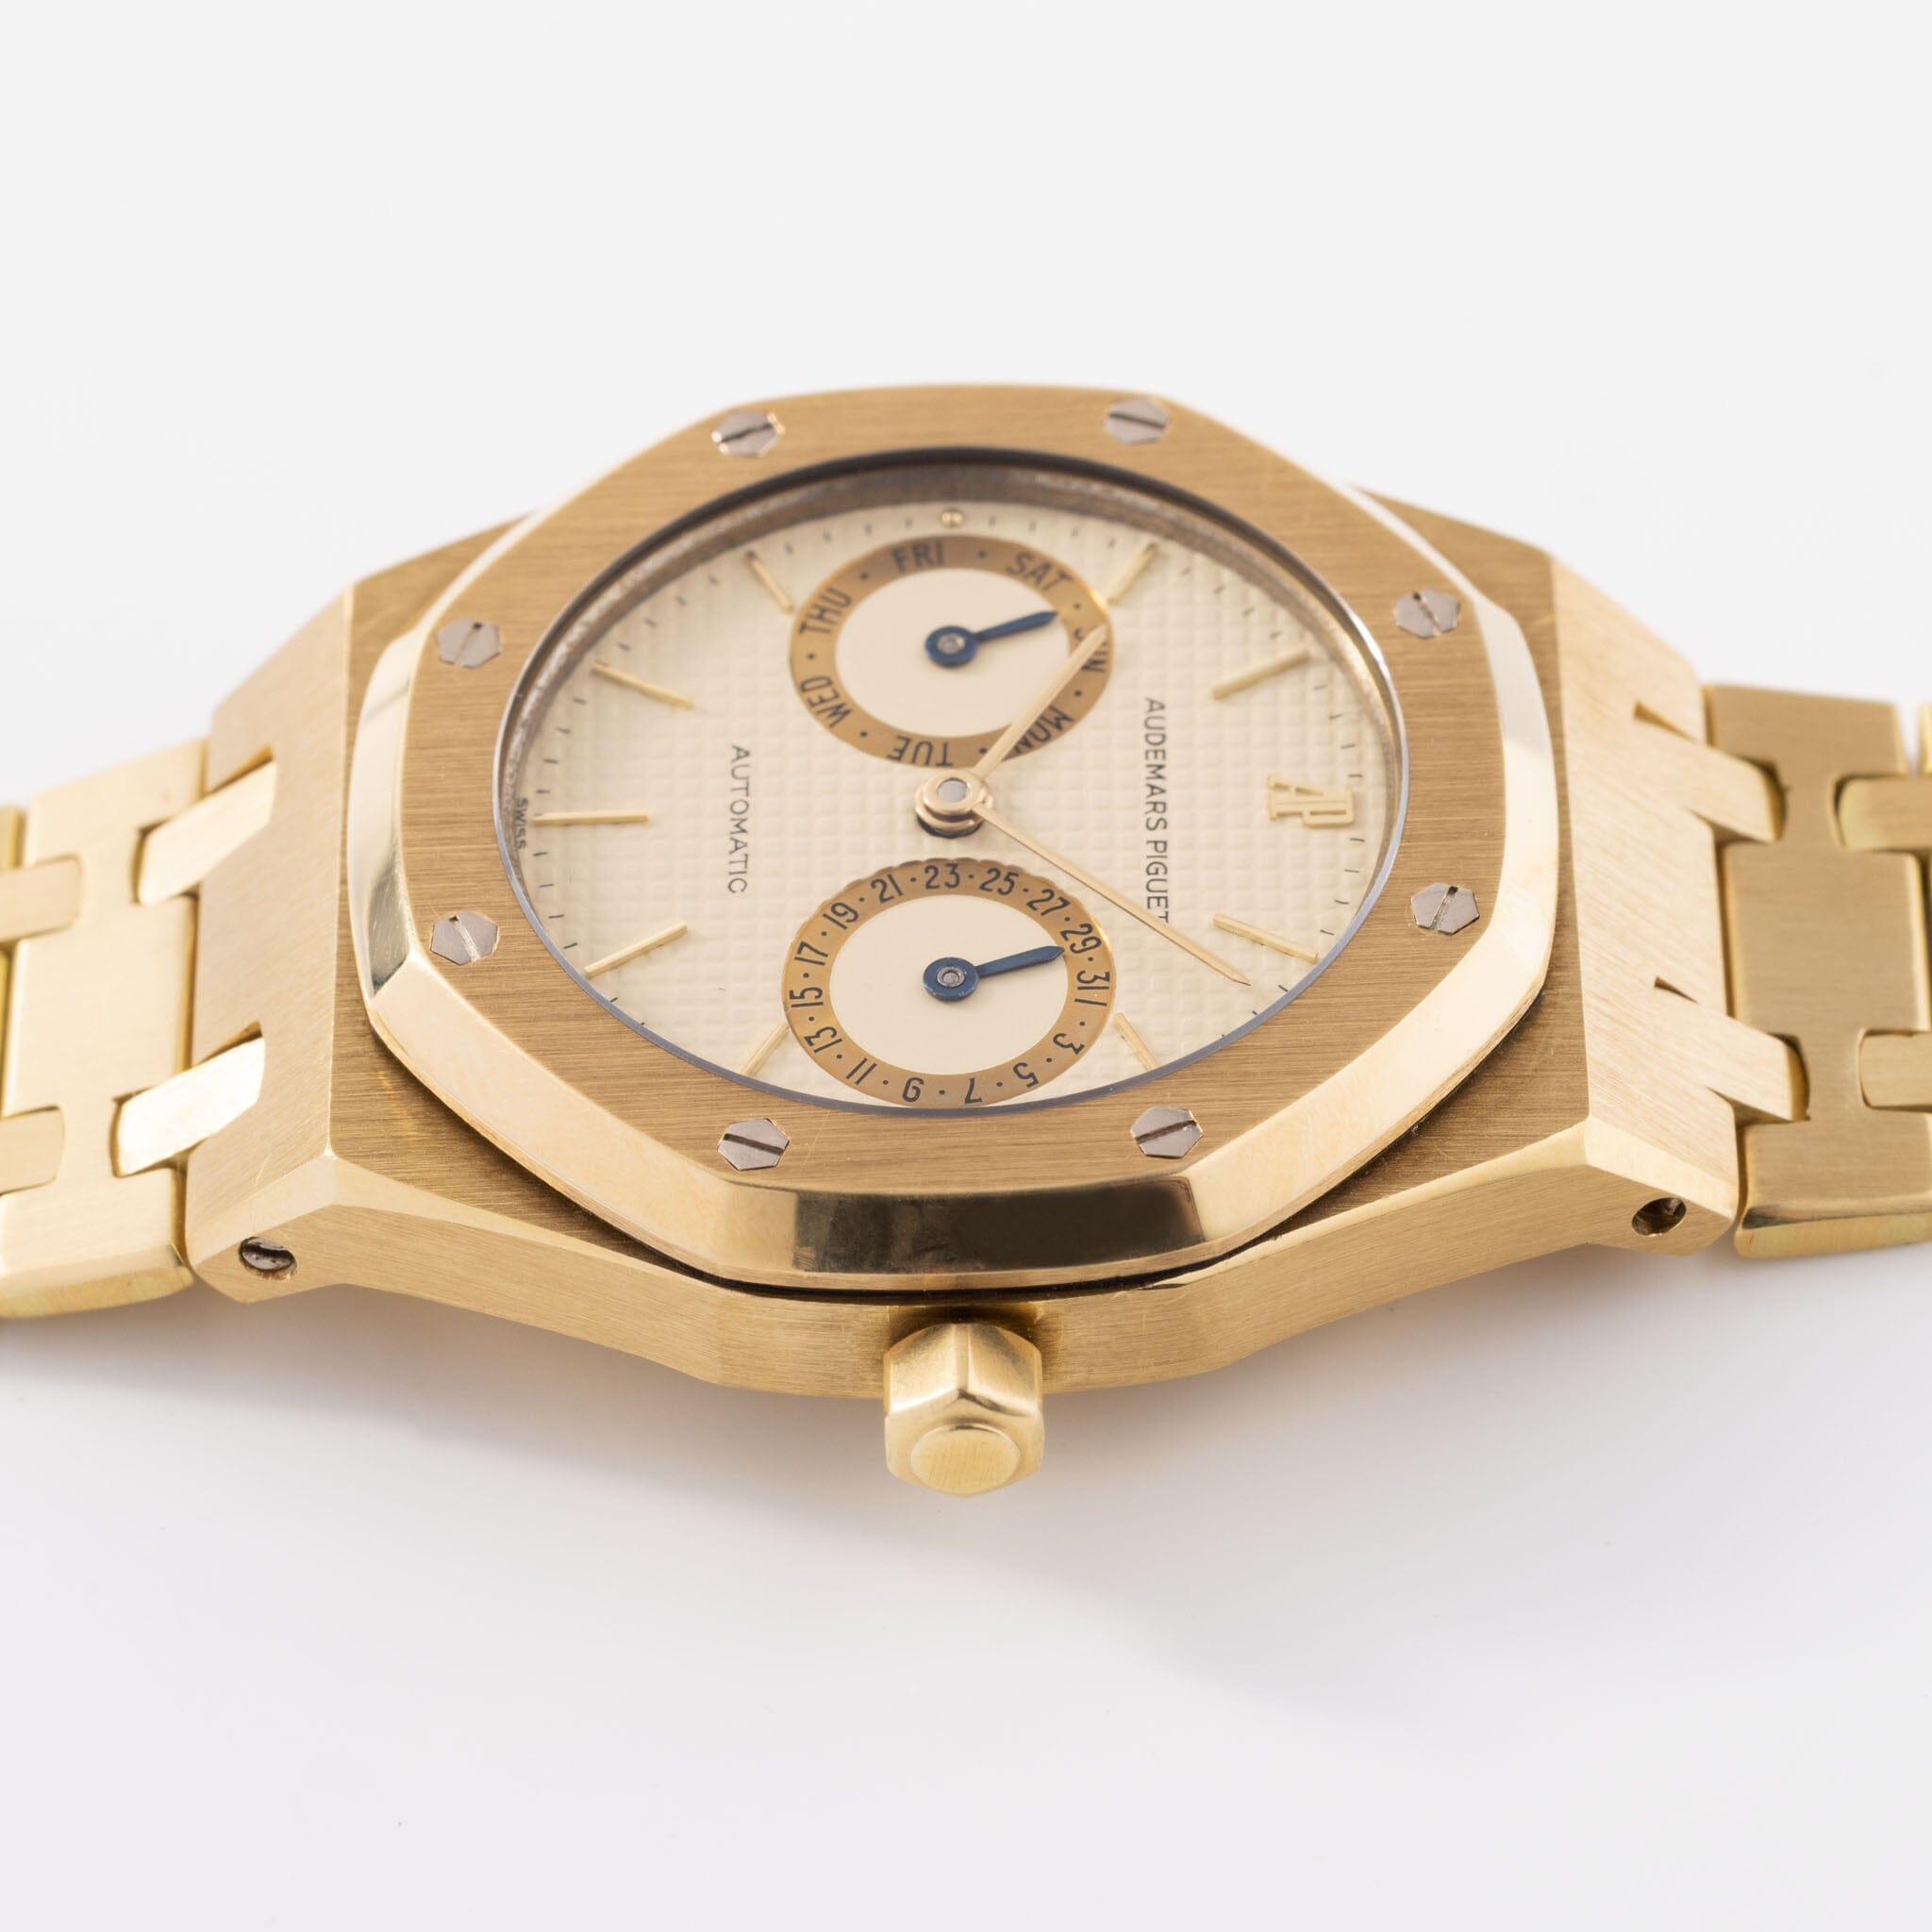 Audemars Piguet Royal Oak Day Date in 18kt Yellow Gold "Owl" With Archive Extract